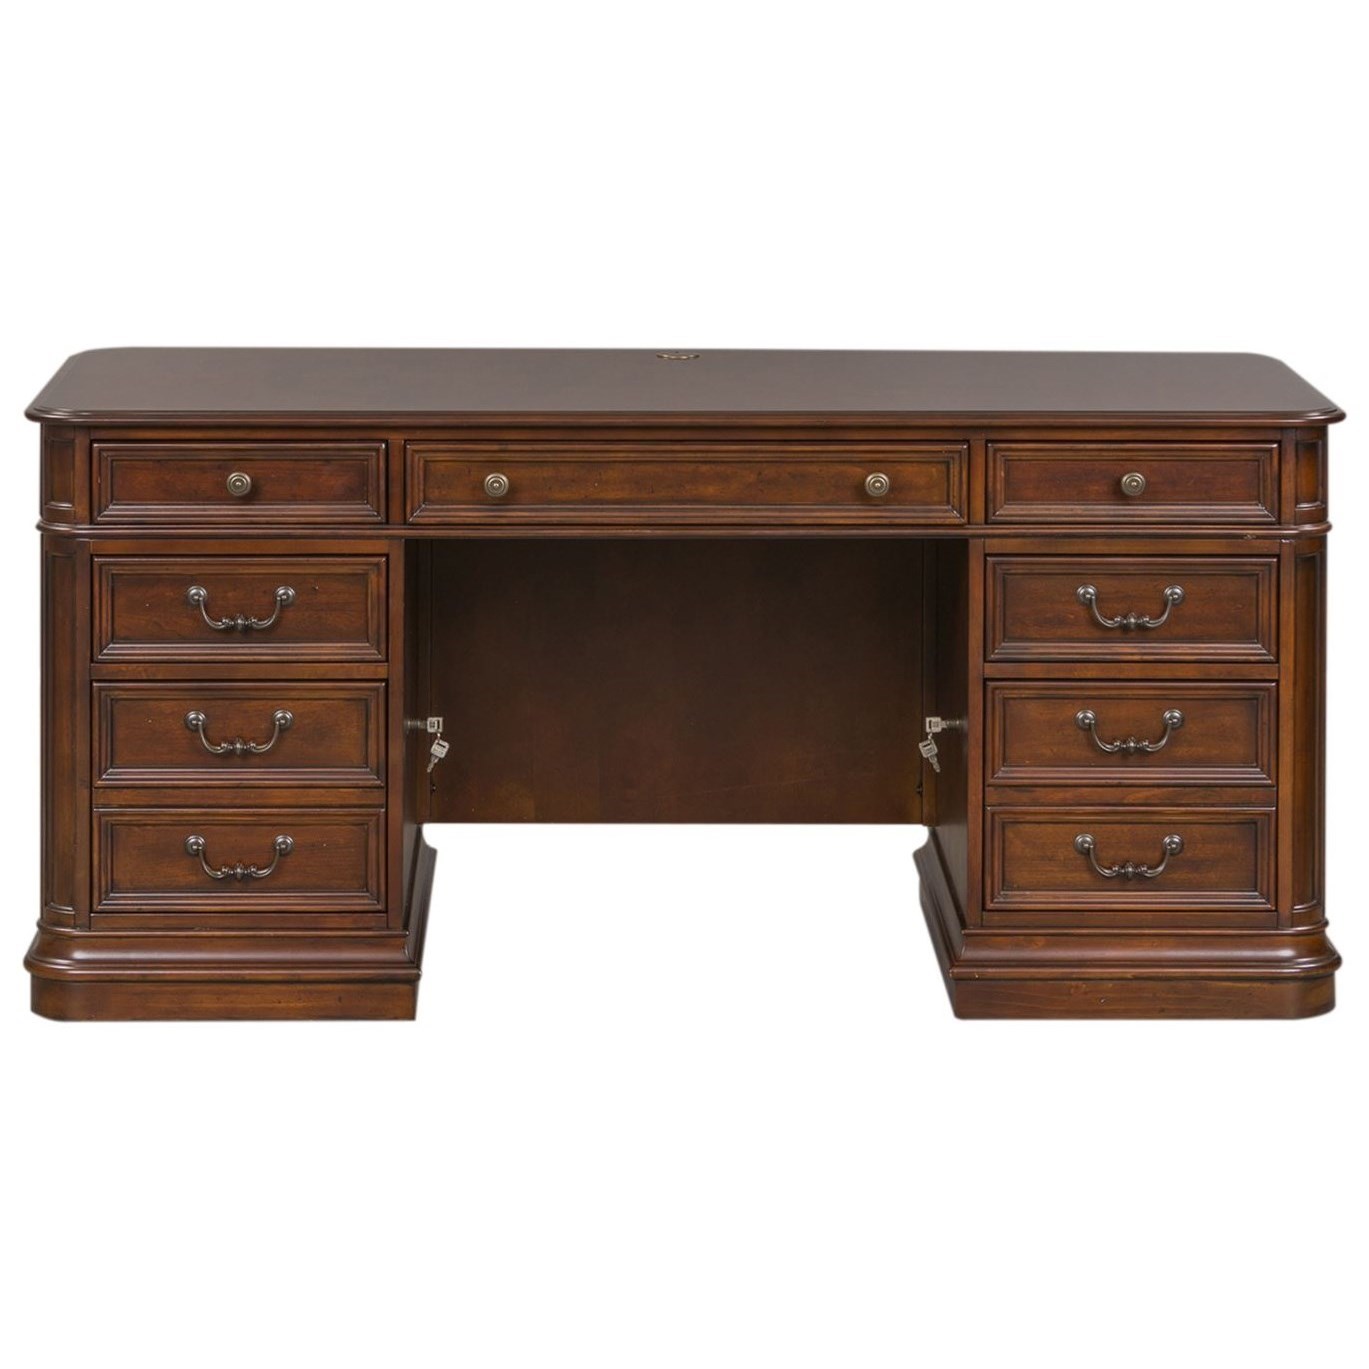 Traditional Executive Desk with 5 Drawers